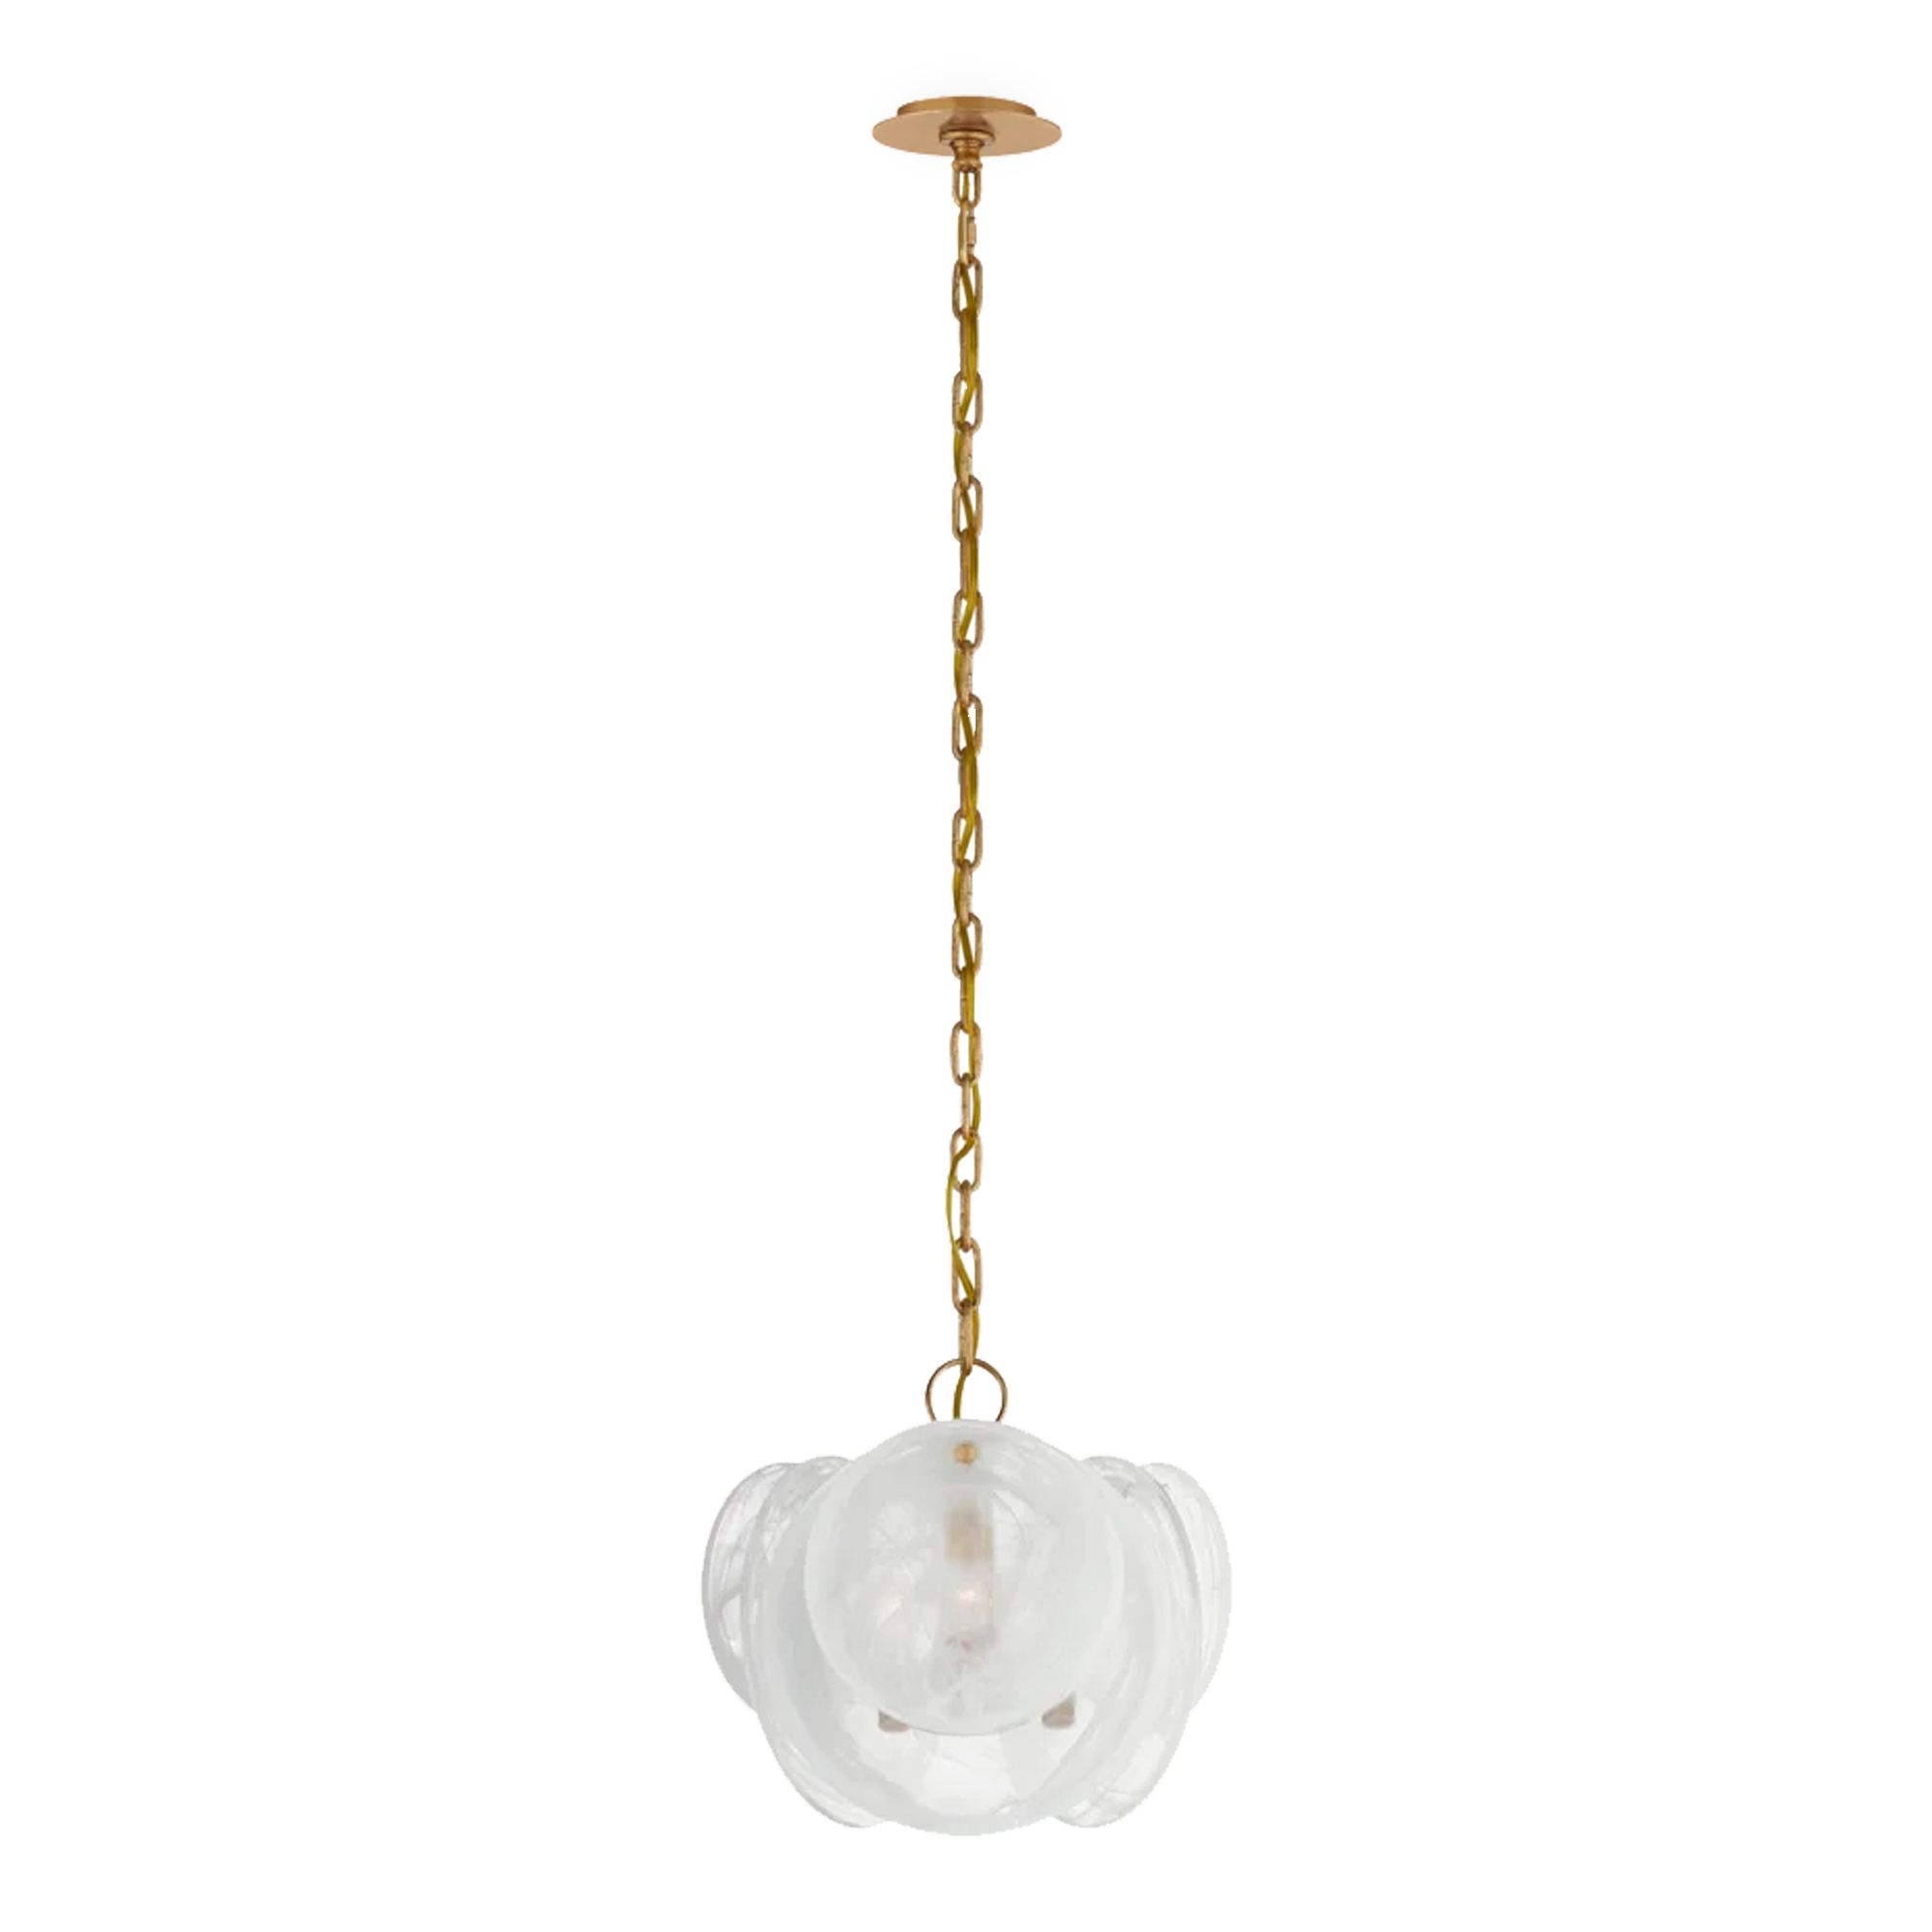 Made with luxurious glass the Loire Peit Chandelier evokes mid-century Italian elegance while adding modern updates in design and finishes.